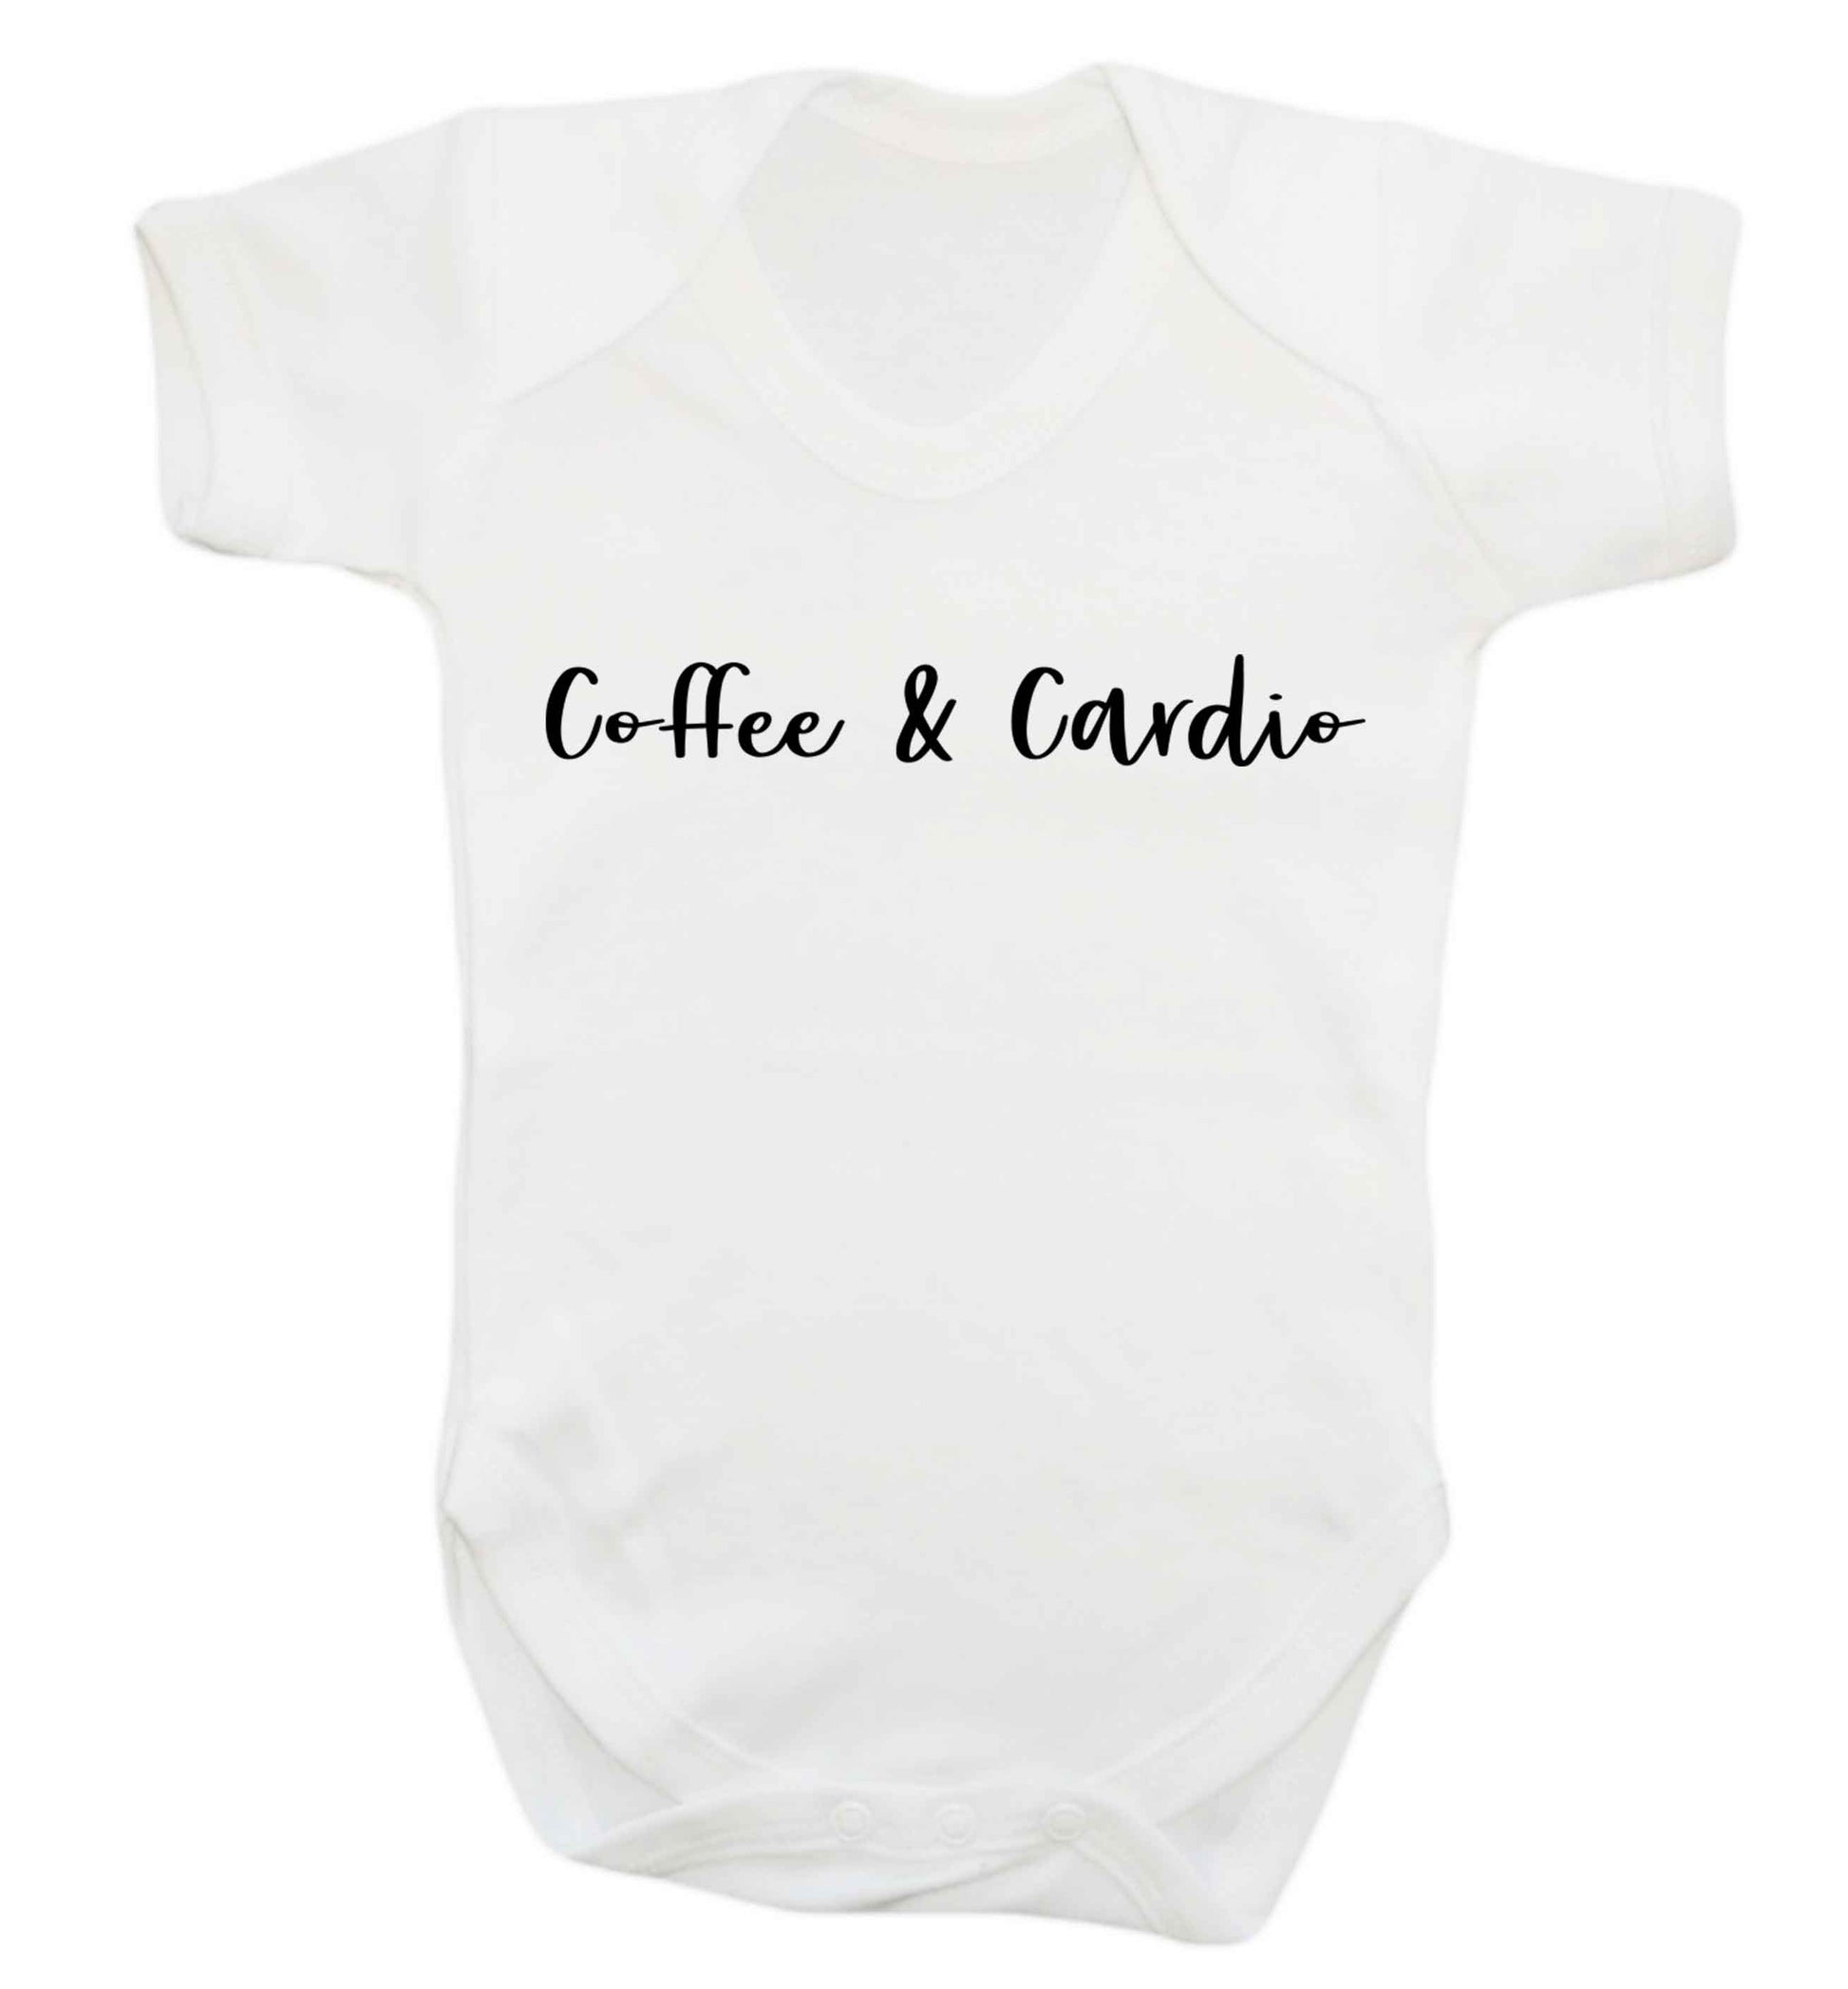 Coffee and cardio Baby Vest white 18-24 months